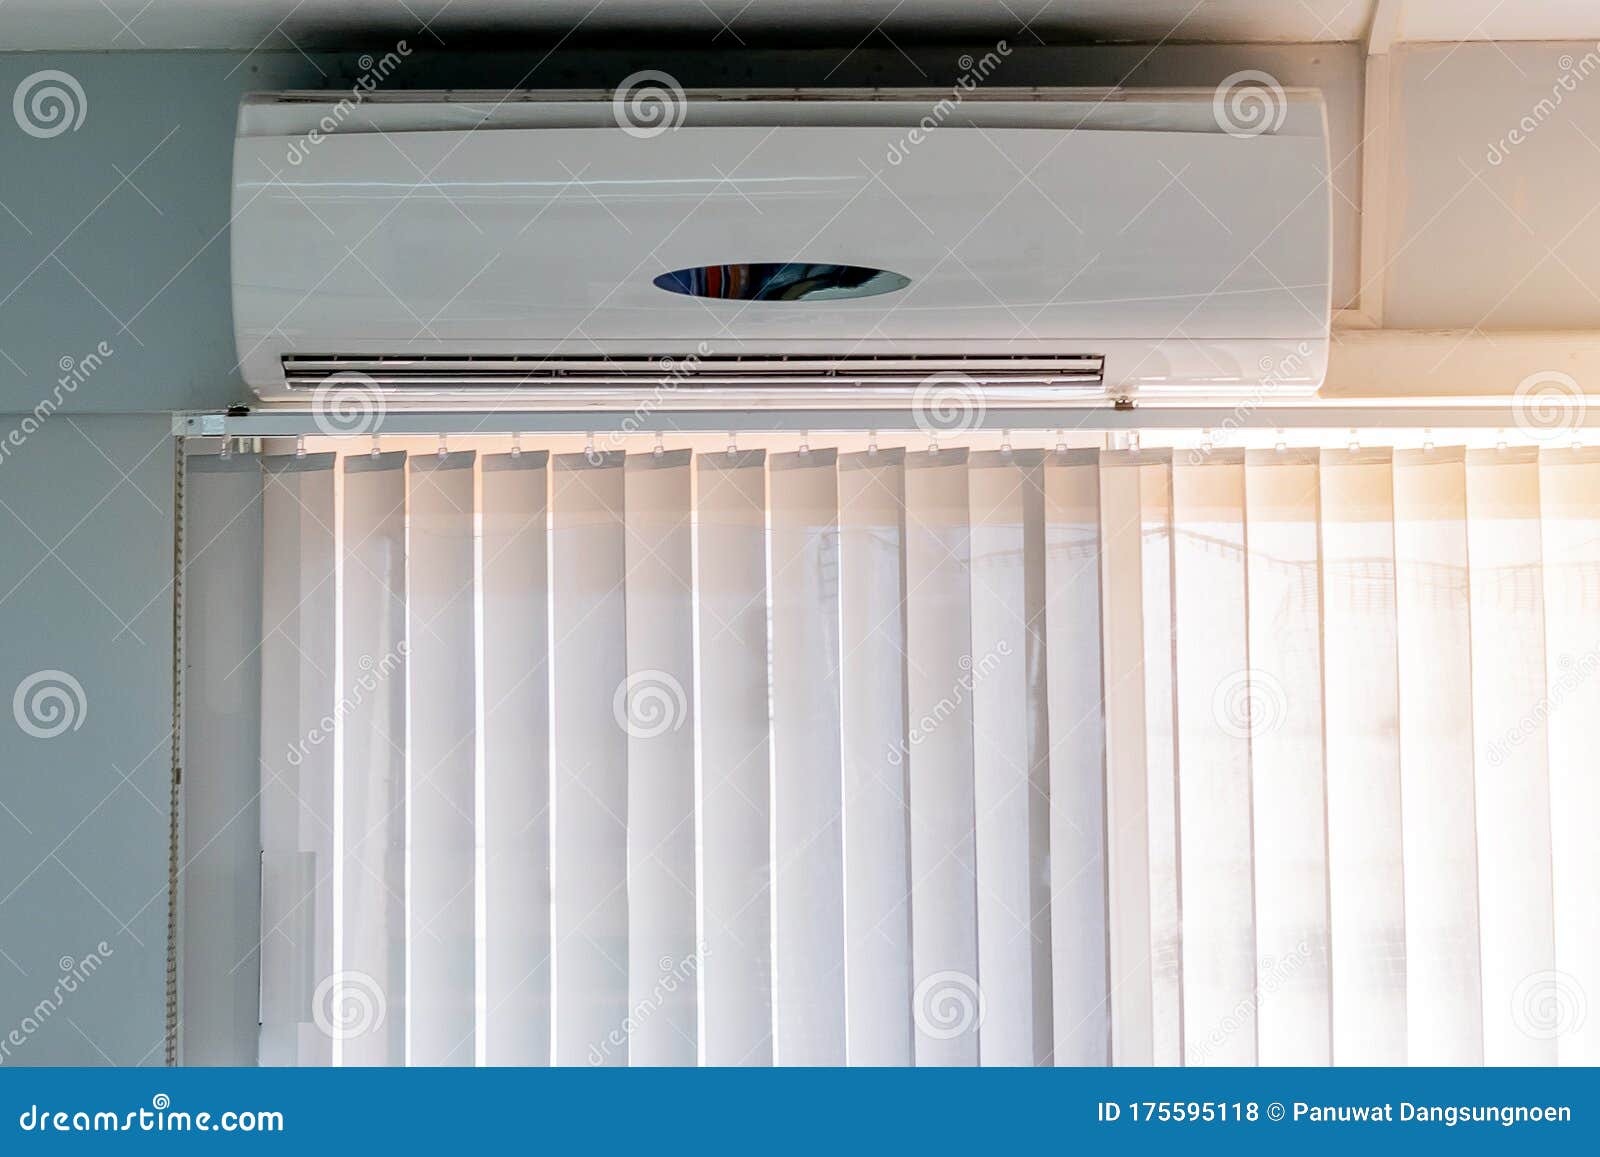 Air Conditioner Inside the Room of Office or House Stock Photo - Image ...